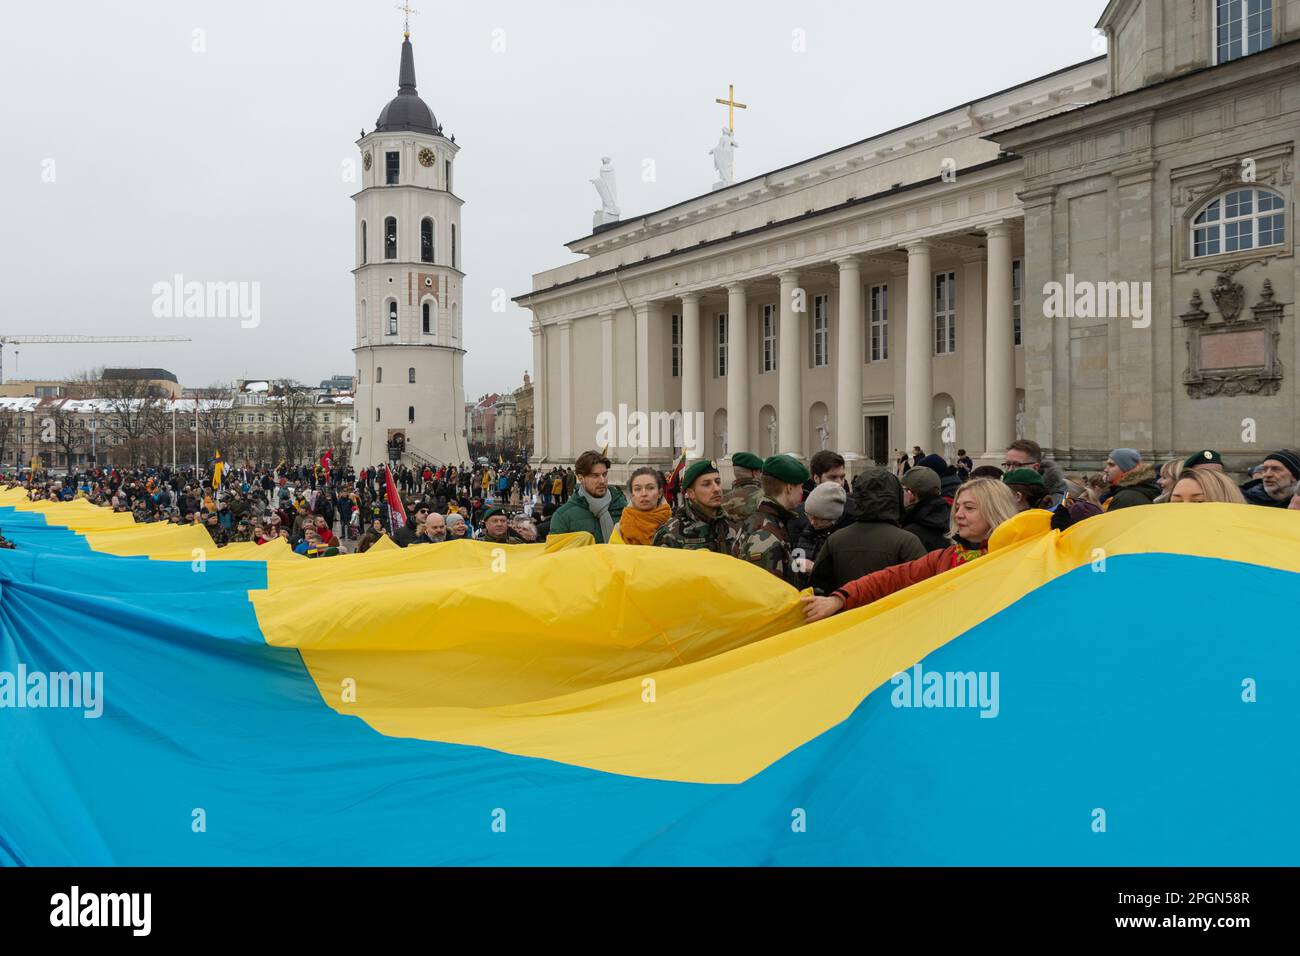 Vilnius Lithuania - March 11 2023: Huge Ukrainian flag along the street in Vilnius, carried by people with Lithuanian and Ukrainian flags Stock Photo